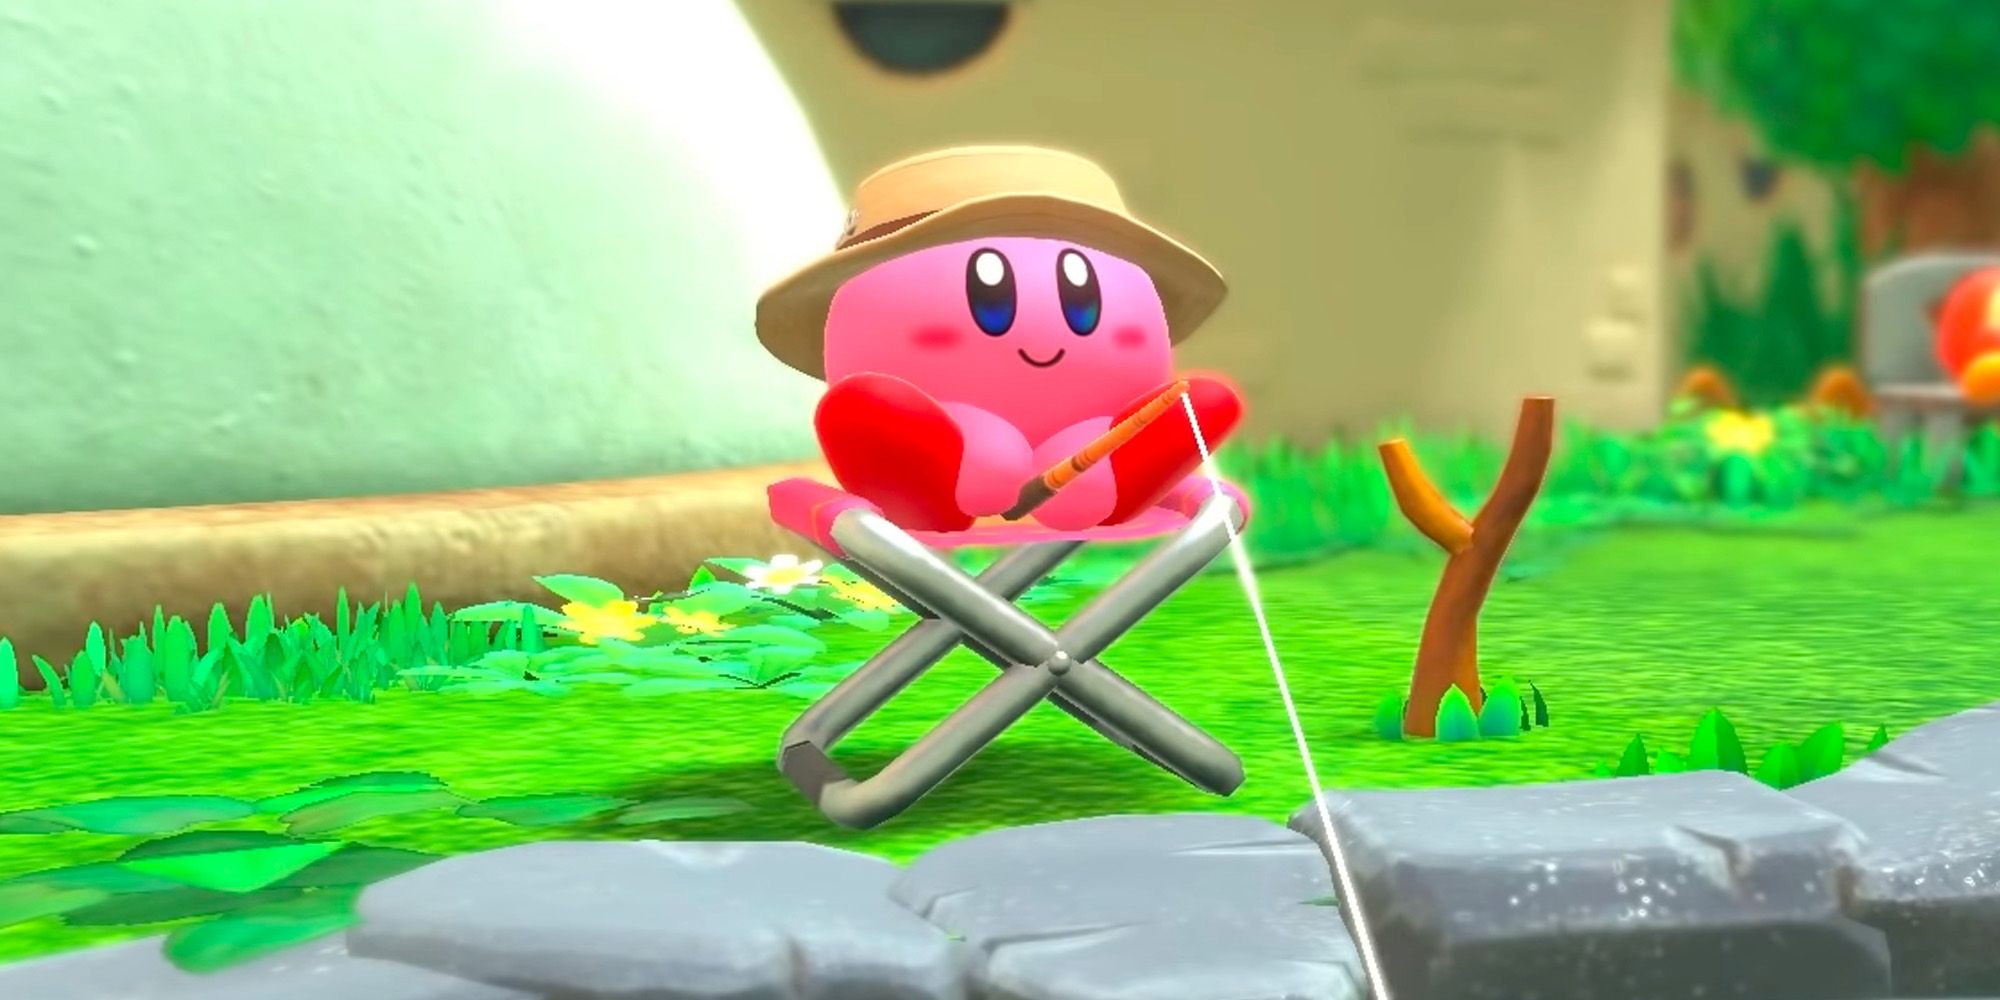 How To Unlock The Flash Fishing Minigame In Kirby And The